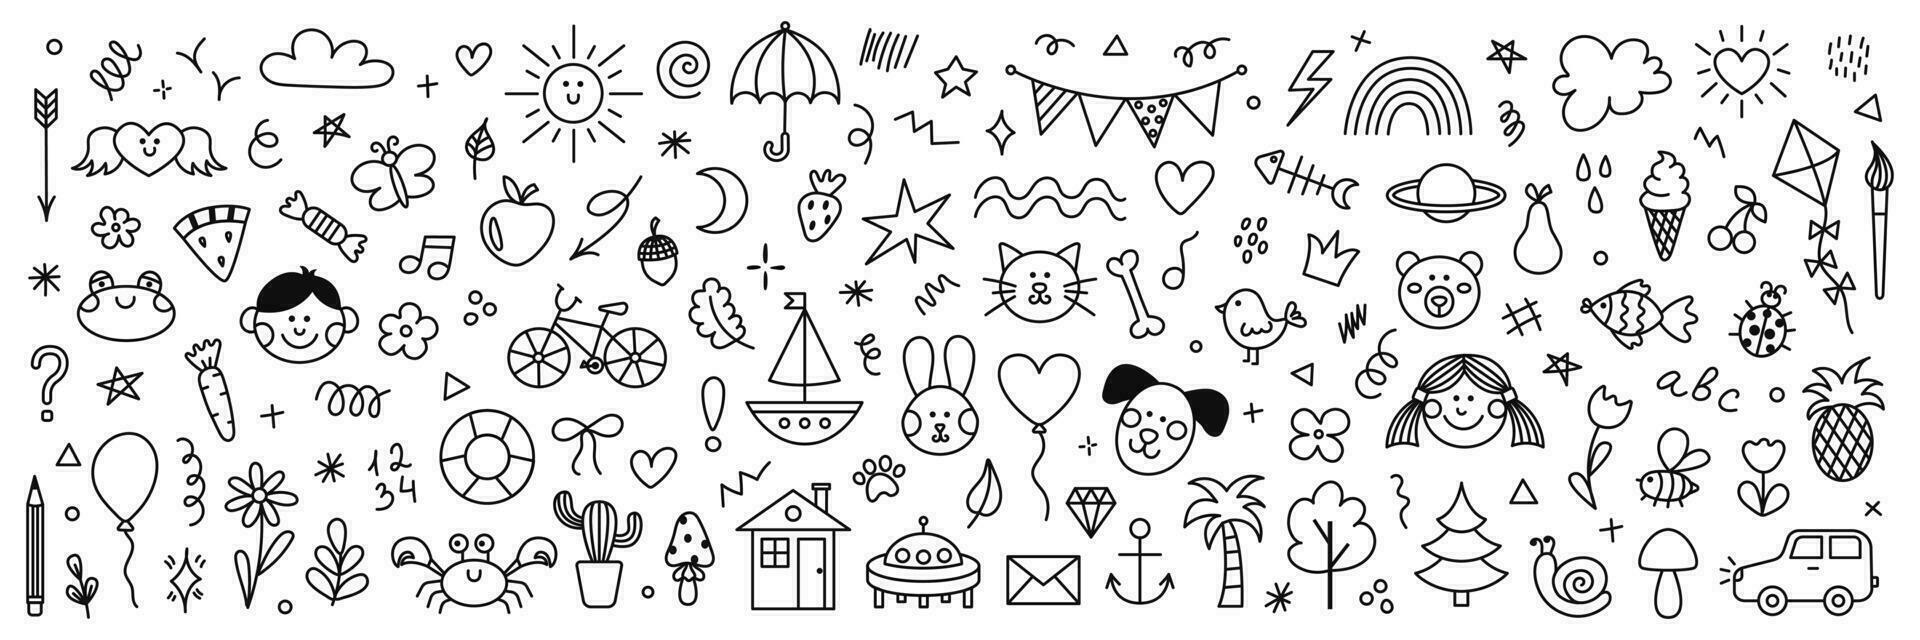 Cute hand drawn doodle set of simple  kids decorative elements. Collection of scribble, animal, flower, sun, cloud. Vector illustration